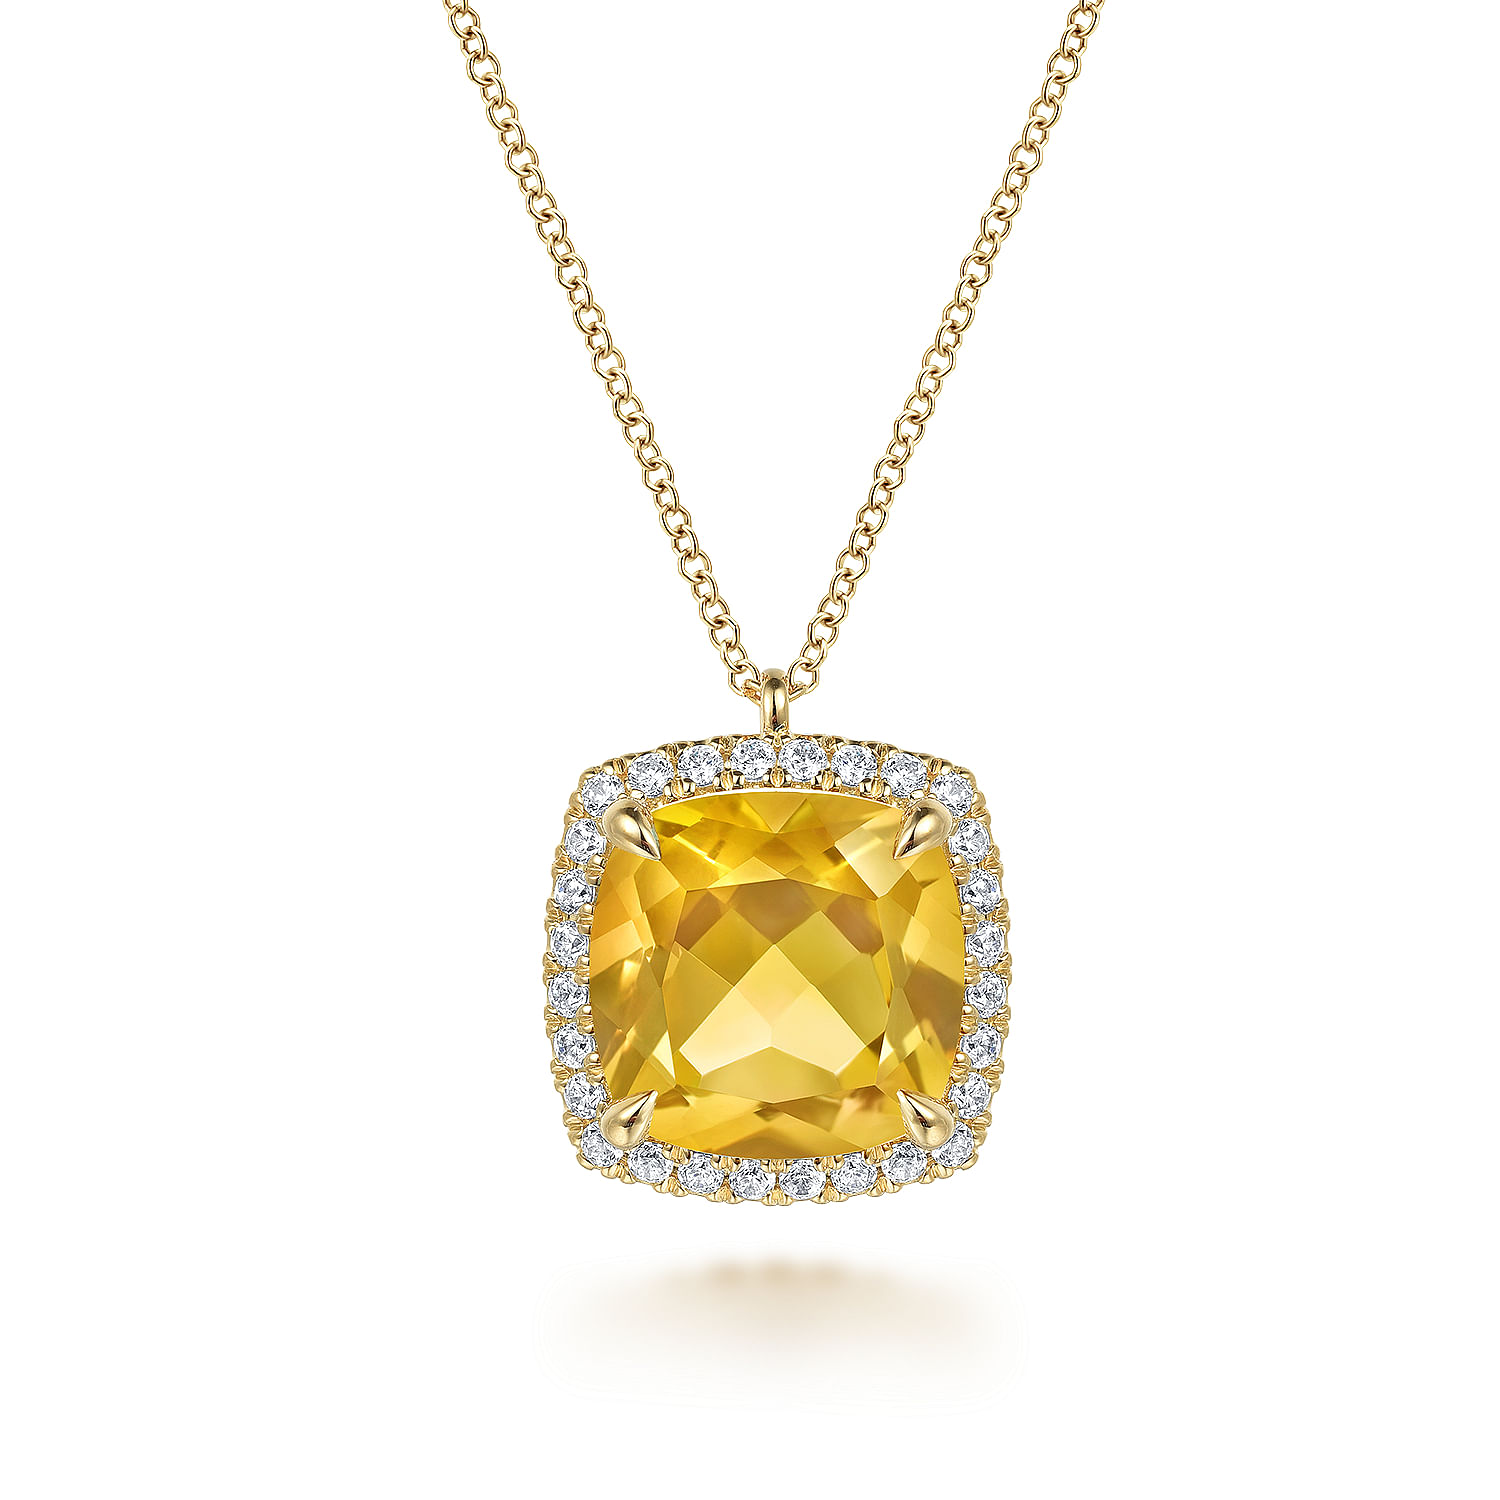 Gabriel - 14K Yellow Gold Diamond and Citrine Cushion Cut Necklace With Flower Pattern J-Back